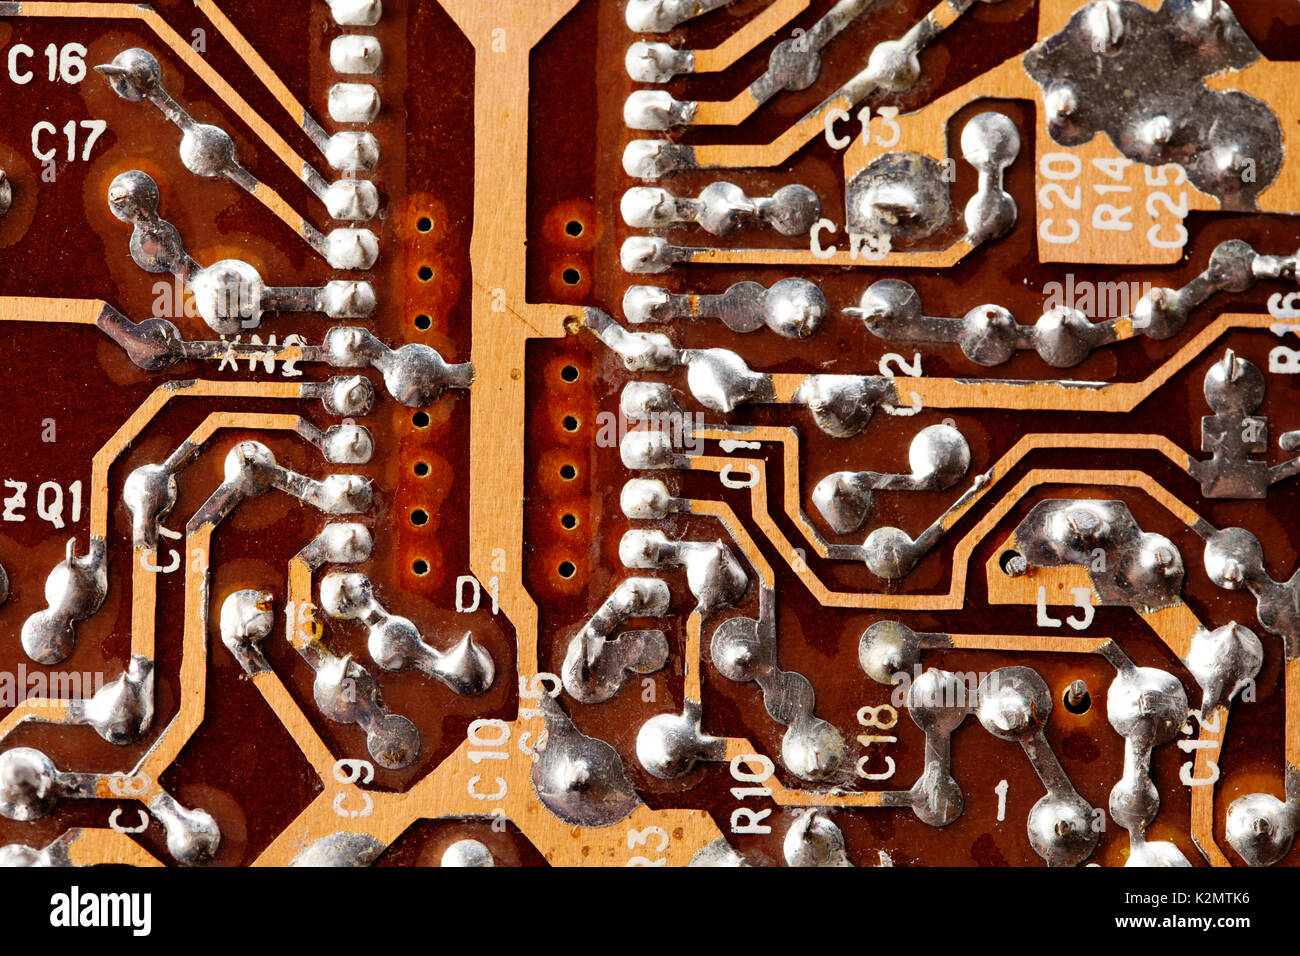 Circuit board chip macro view. Vintage electronic component with soldering traces. Old style design hardware Stock Photo